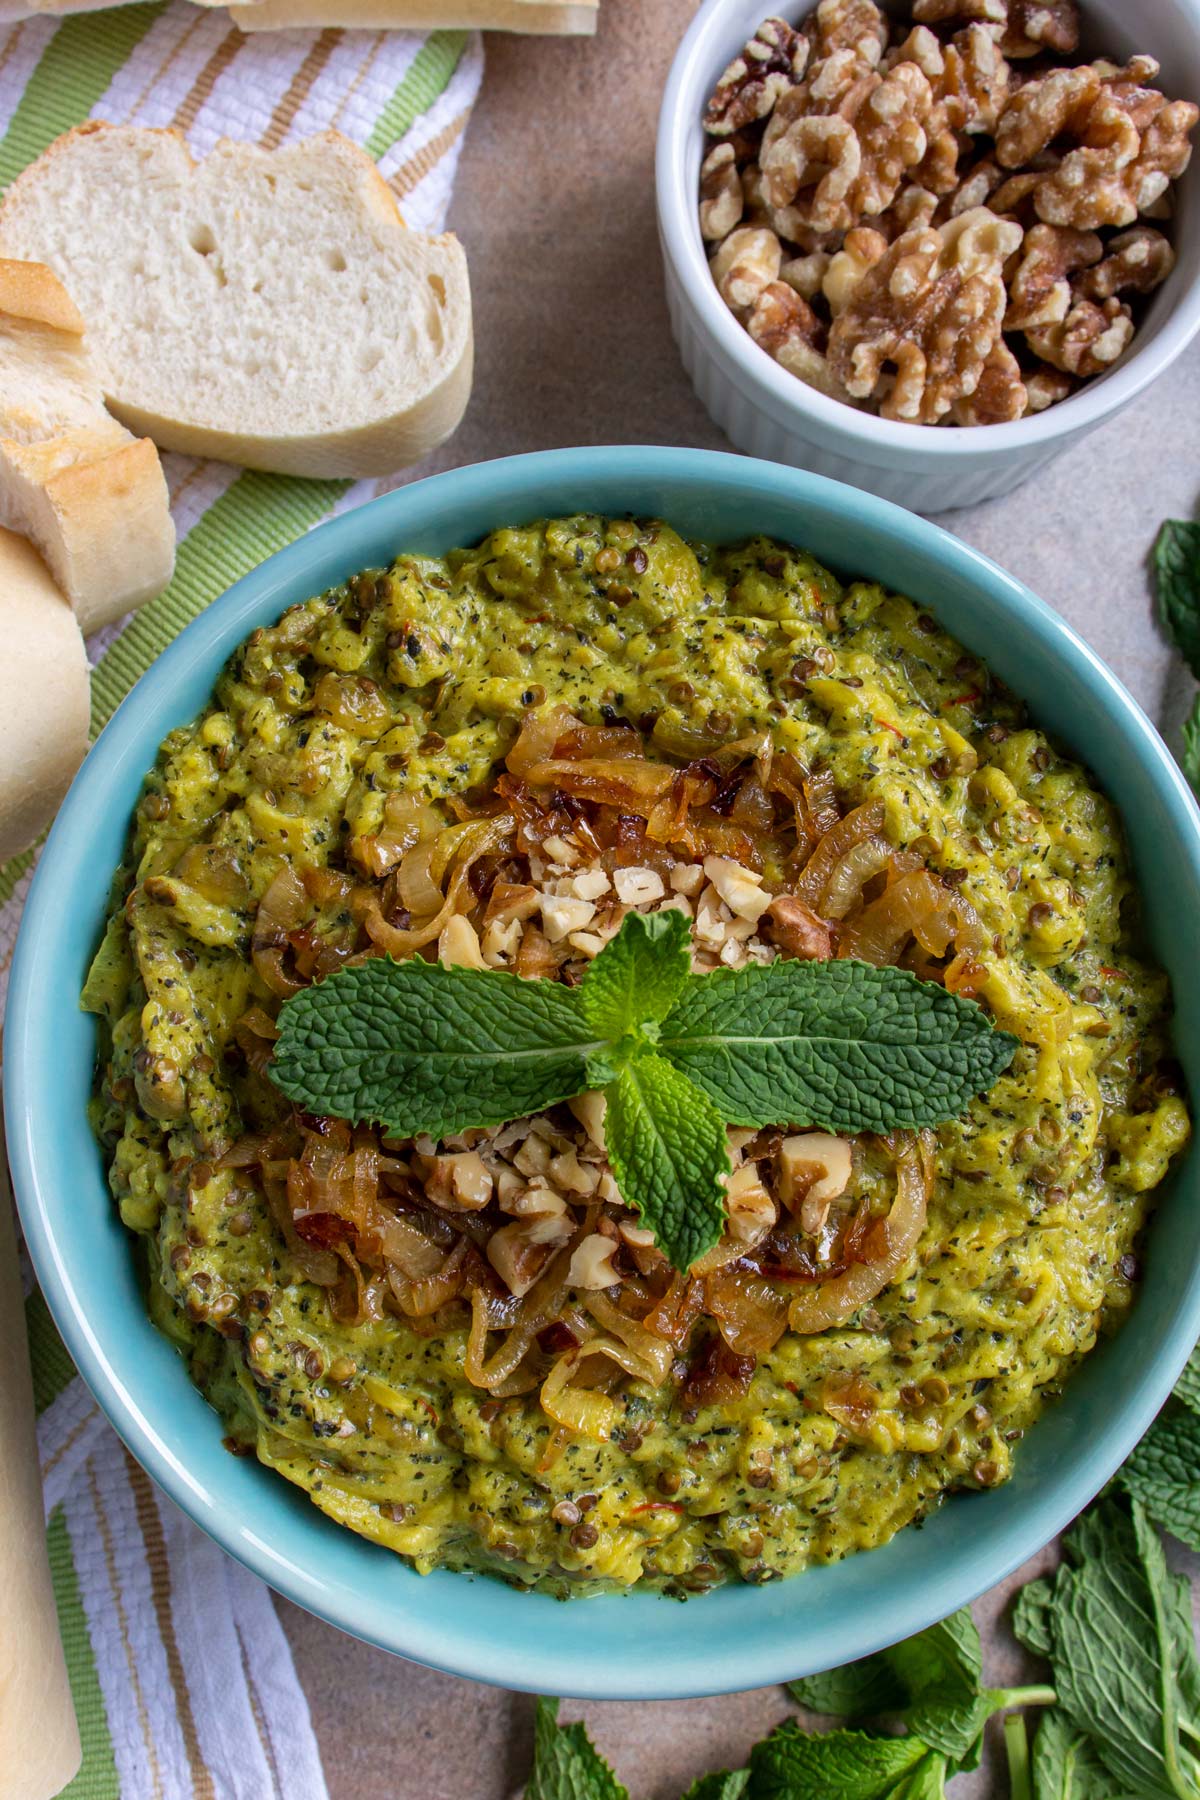 Kashke bademjan eggplant dip in a blue bowl topped with chopped walnuts and a mint sprig.